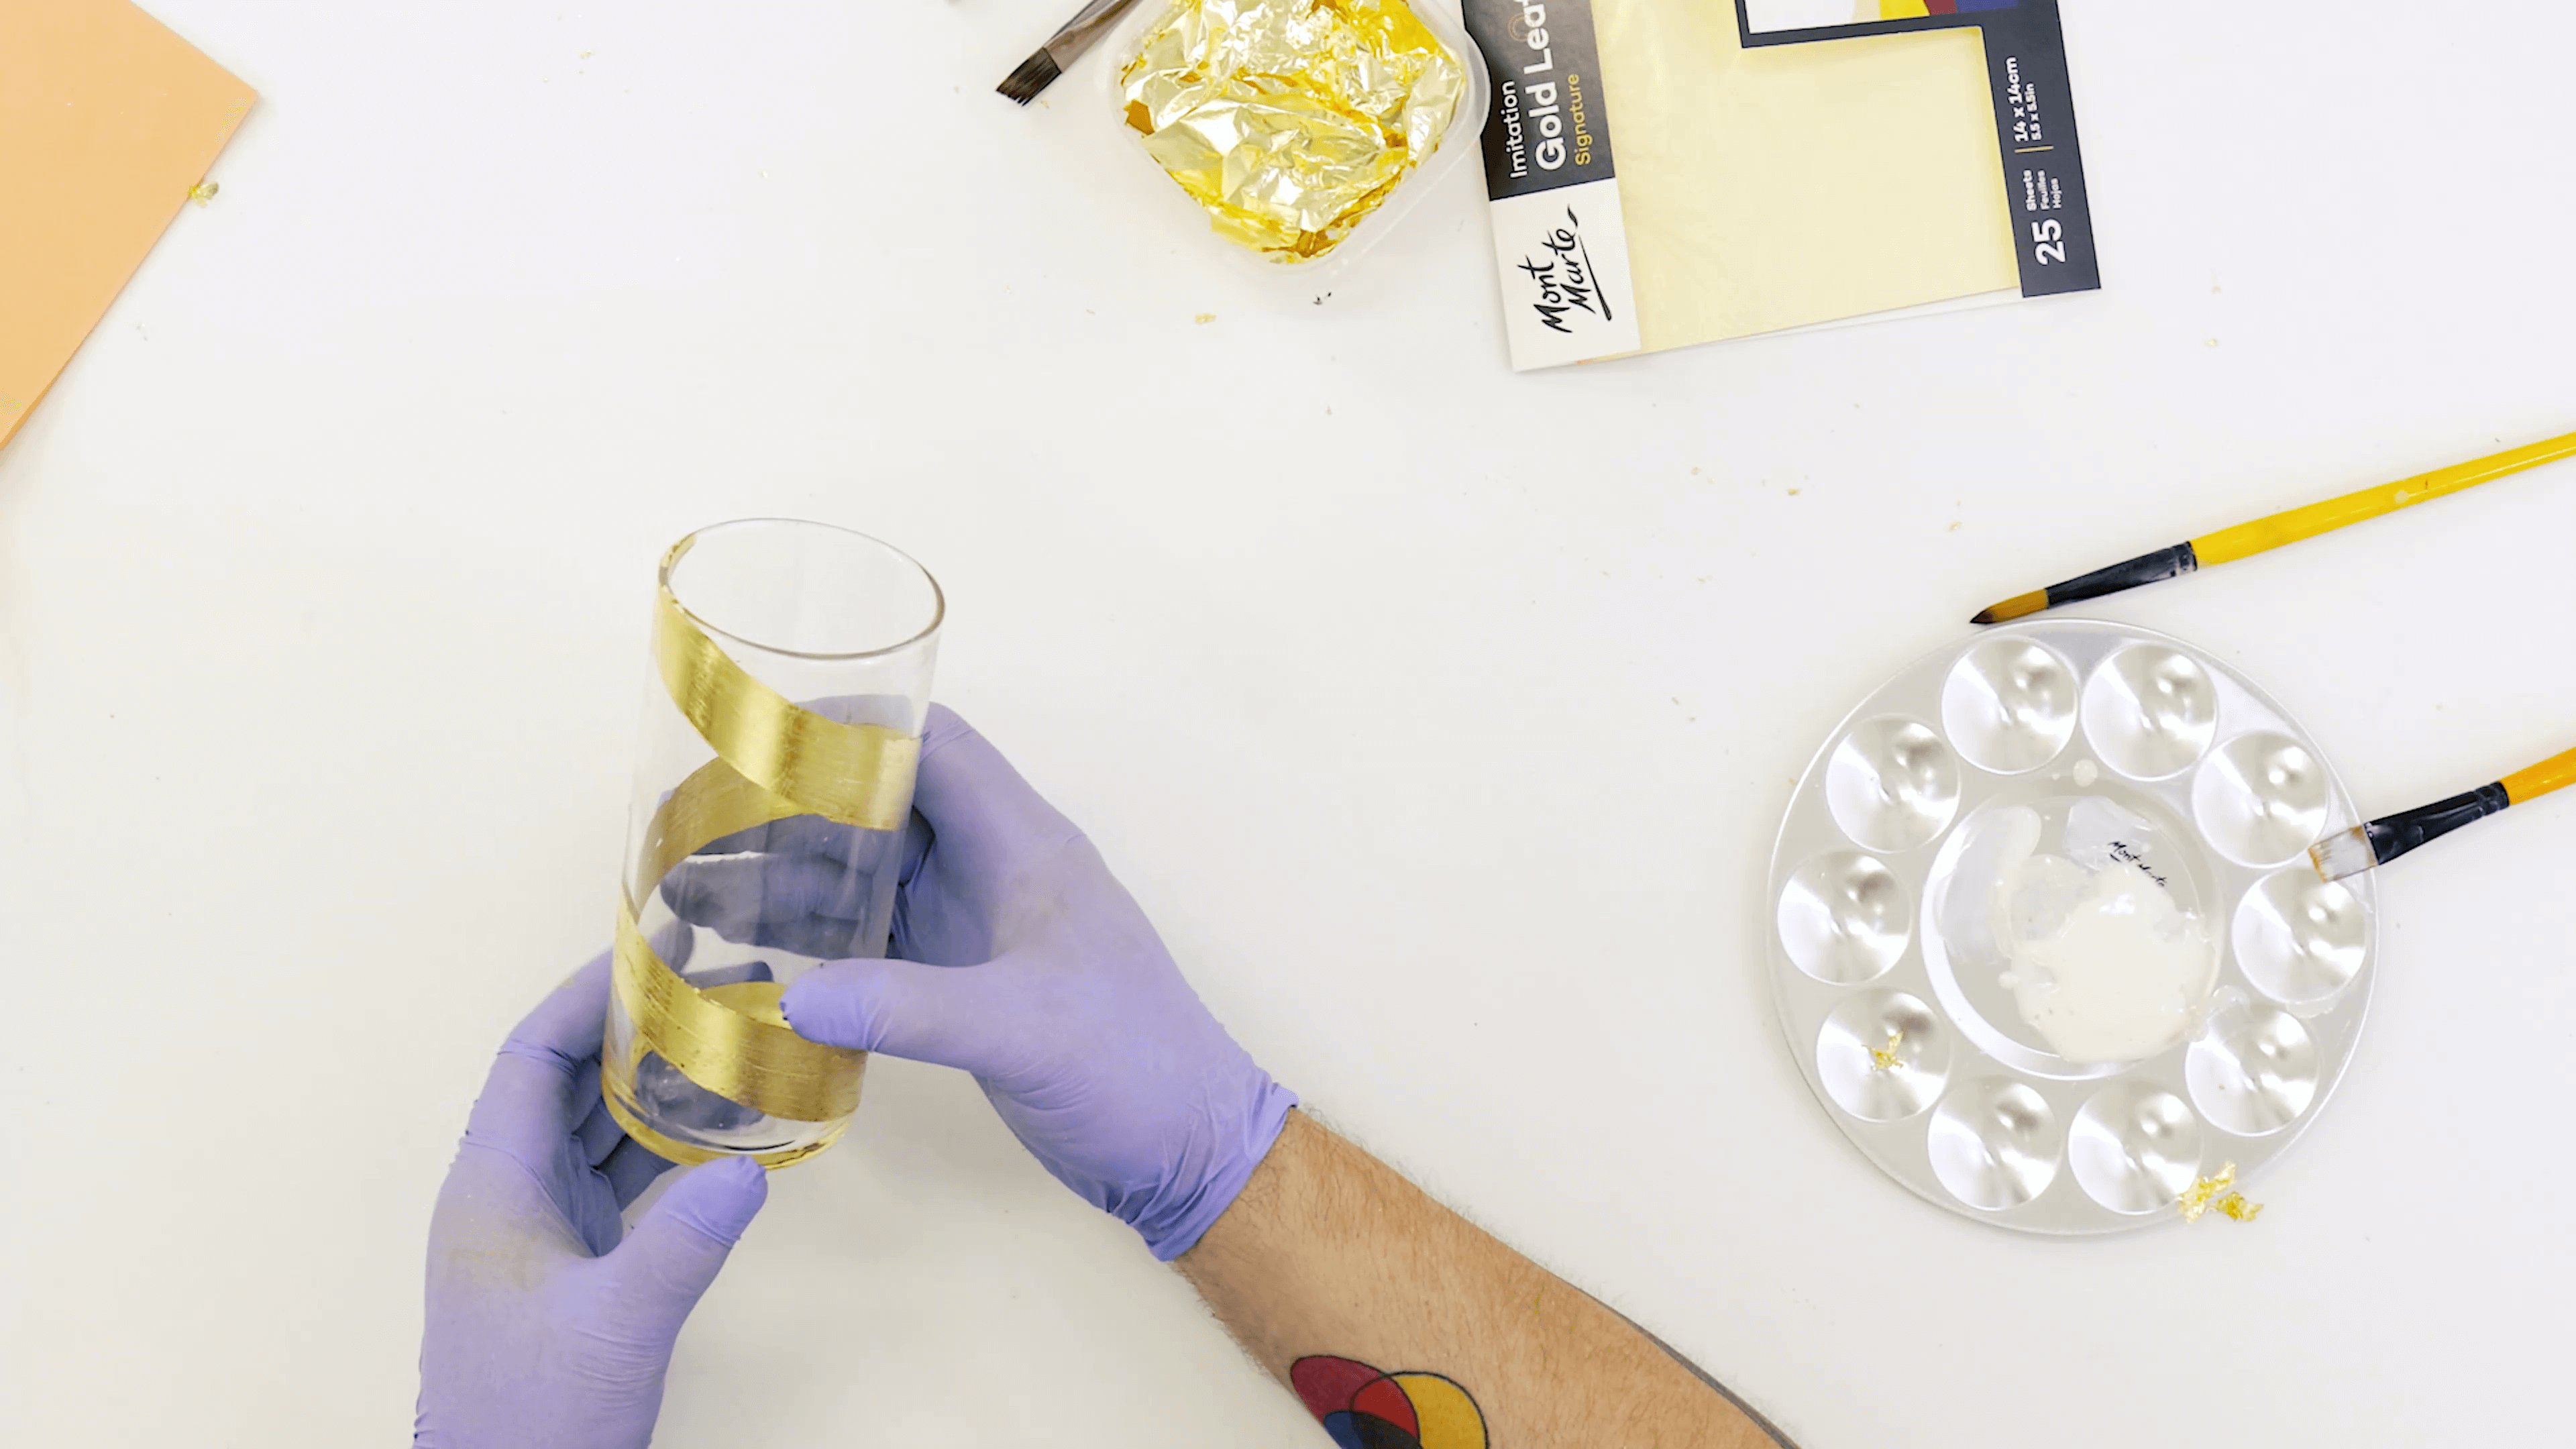 Person wrapping gold leaf on a glass cup, with purple gloves on.